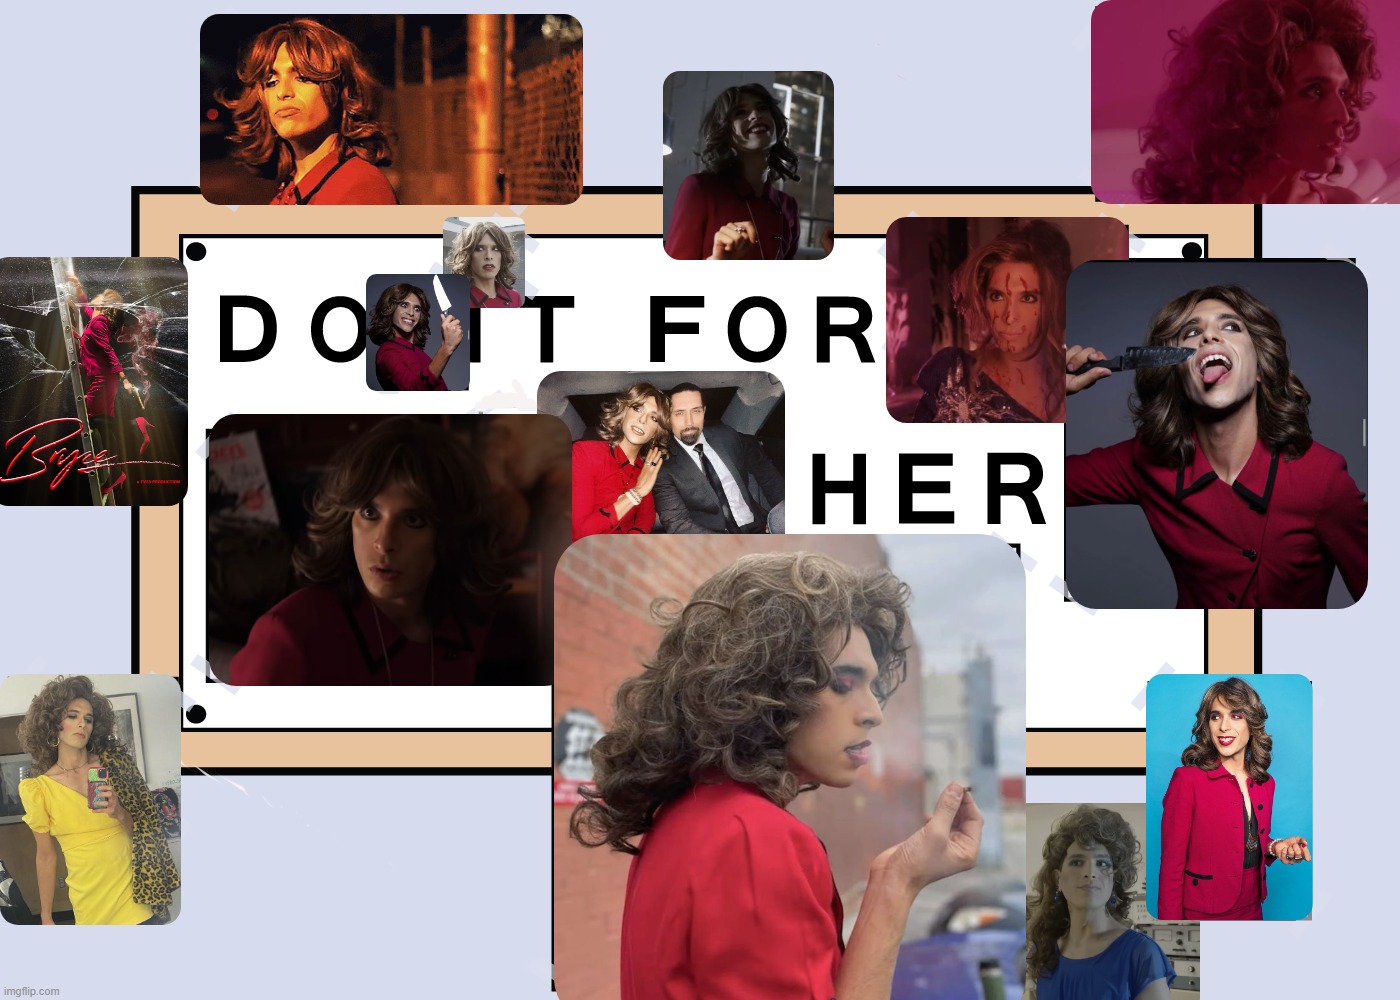 Do It For Her Bryce Tankthrust | image tagged in do it for her,bryce tankthrust,brandon rogers,bryce | made w/ Imgflip meme maker